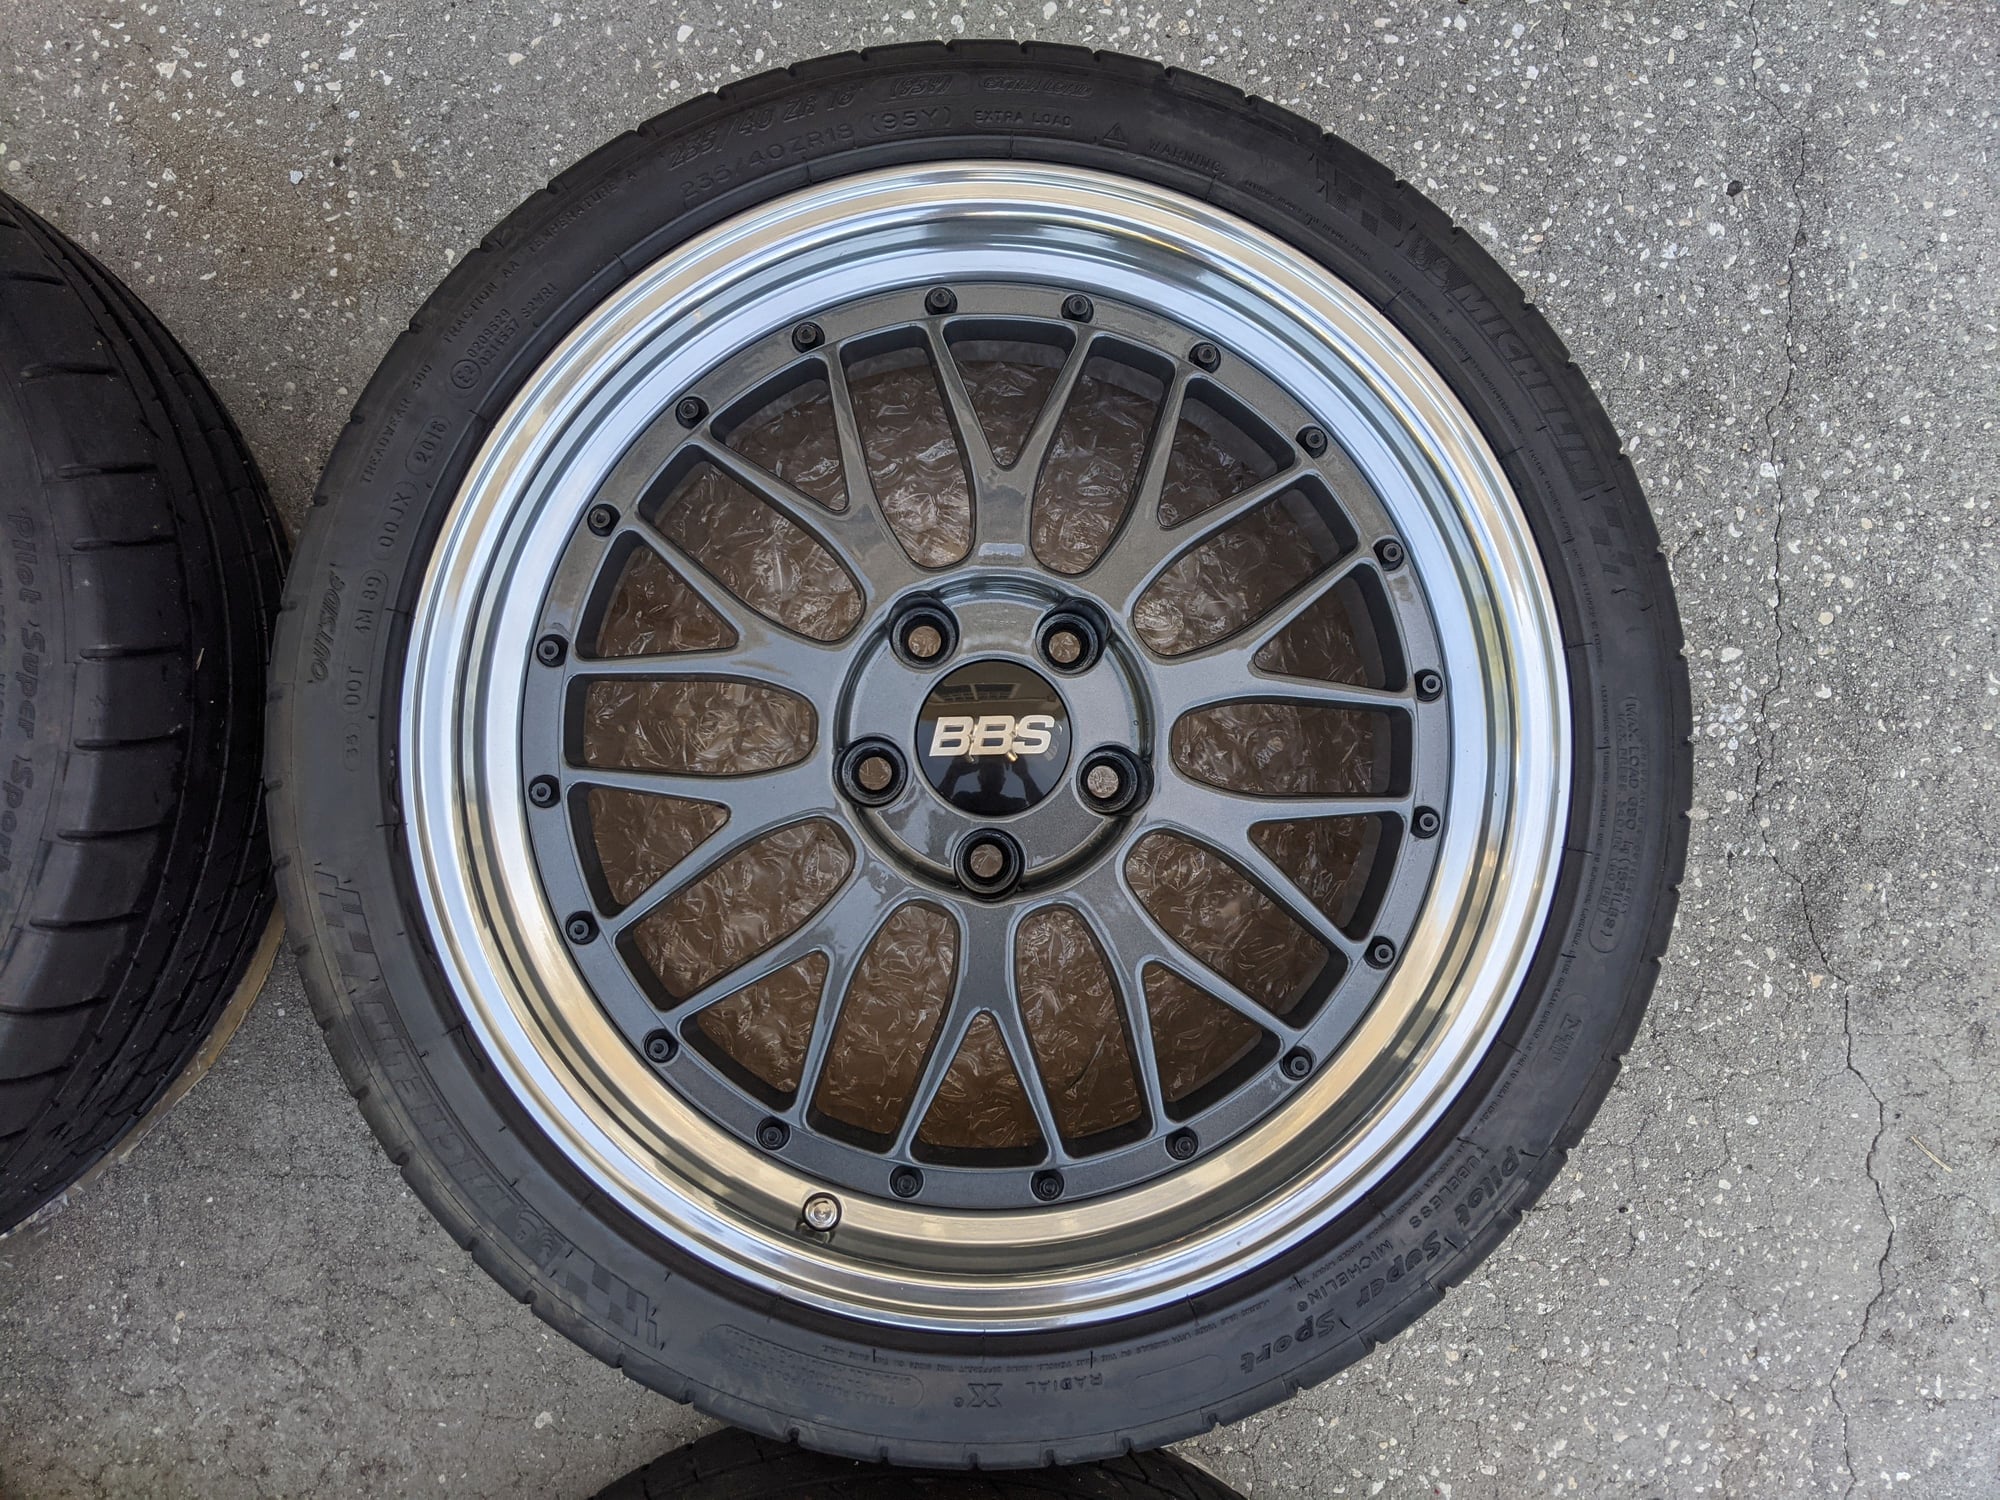 Wheels and Tires/Axles - 18" BBS LM wheels - 5x114.3 - 18x8.5 - 18x9.5 - Used - All Years Any Make All Models - Tarpon Springs, FL 34689, United States